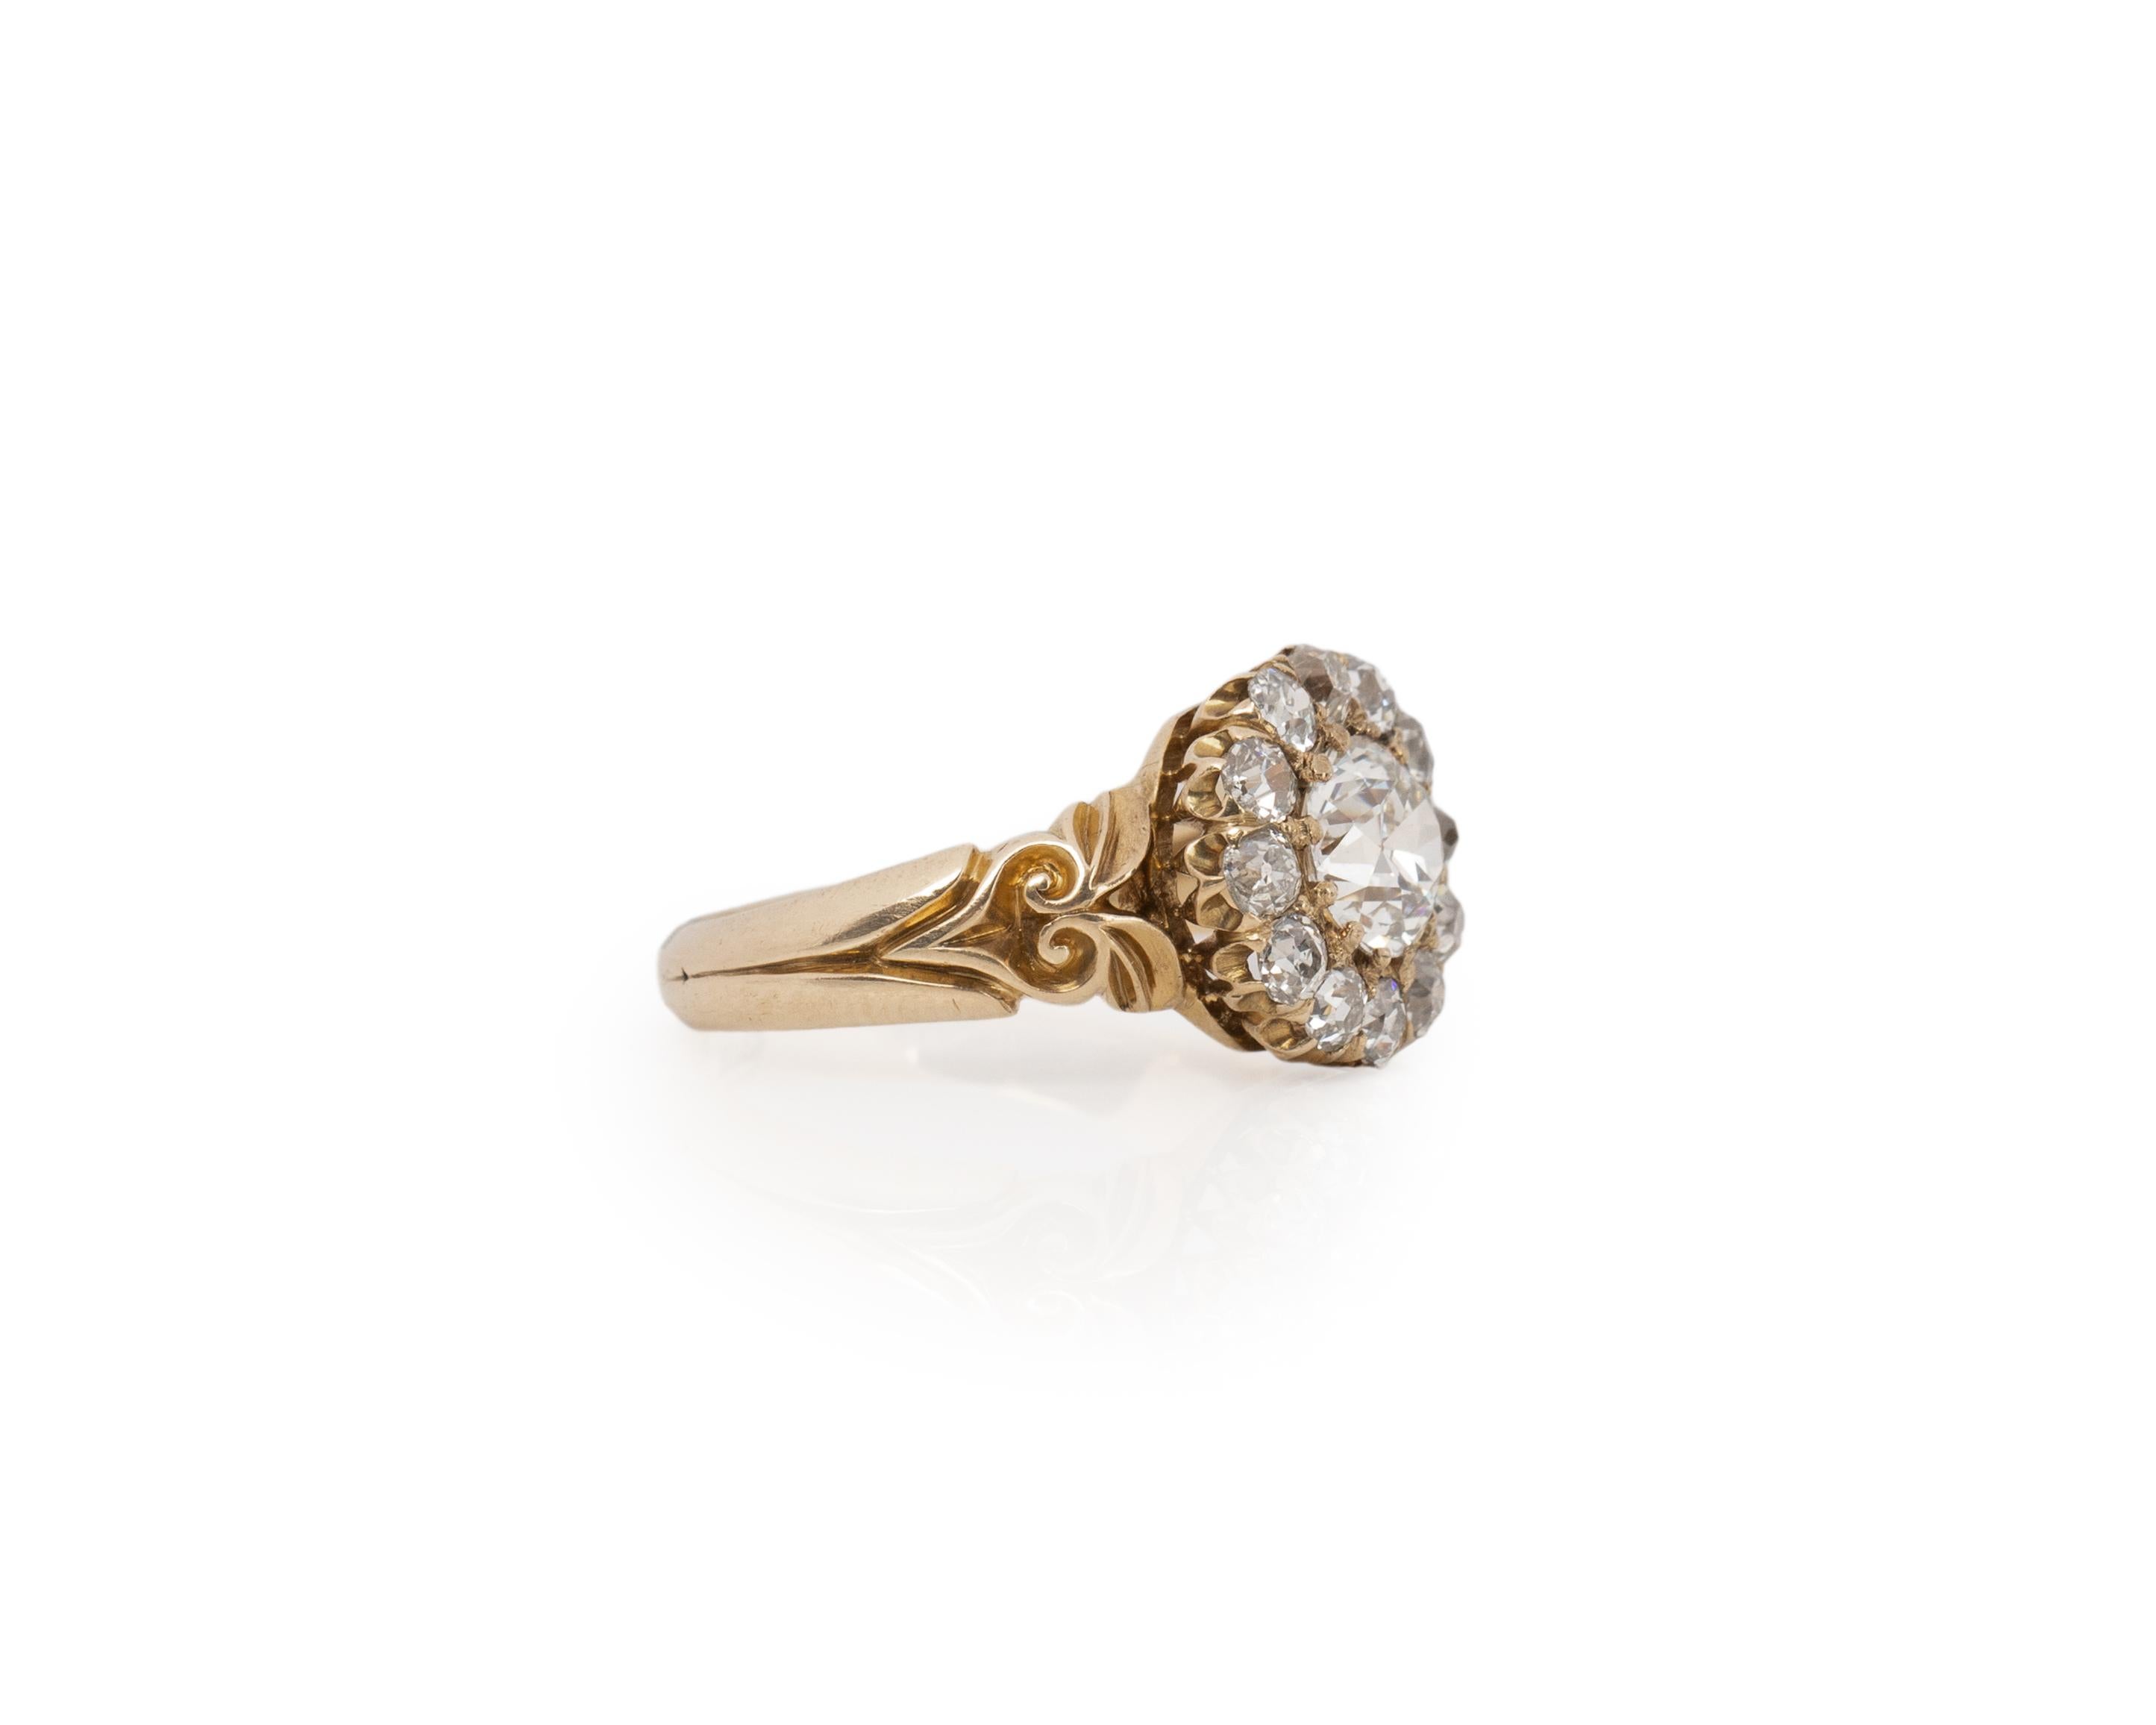 Ring Size: 6.75
Metal Type: 18K Yellow Gold [Hallmarked, and Tested]
Weight: 4.6grams

Center Diamond Details:
GIA LAB REPORT #: 1226816979
Weight: 1.03ct
Cut: Old European brilliant
Color: I
Clarity: VS1
Measurements: 6.59mm x 6.38mm x 3.84mm

Side